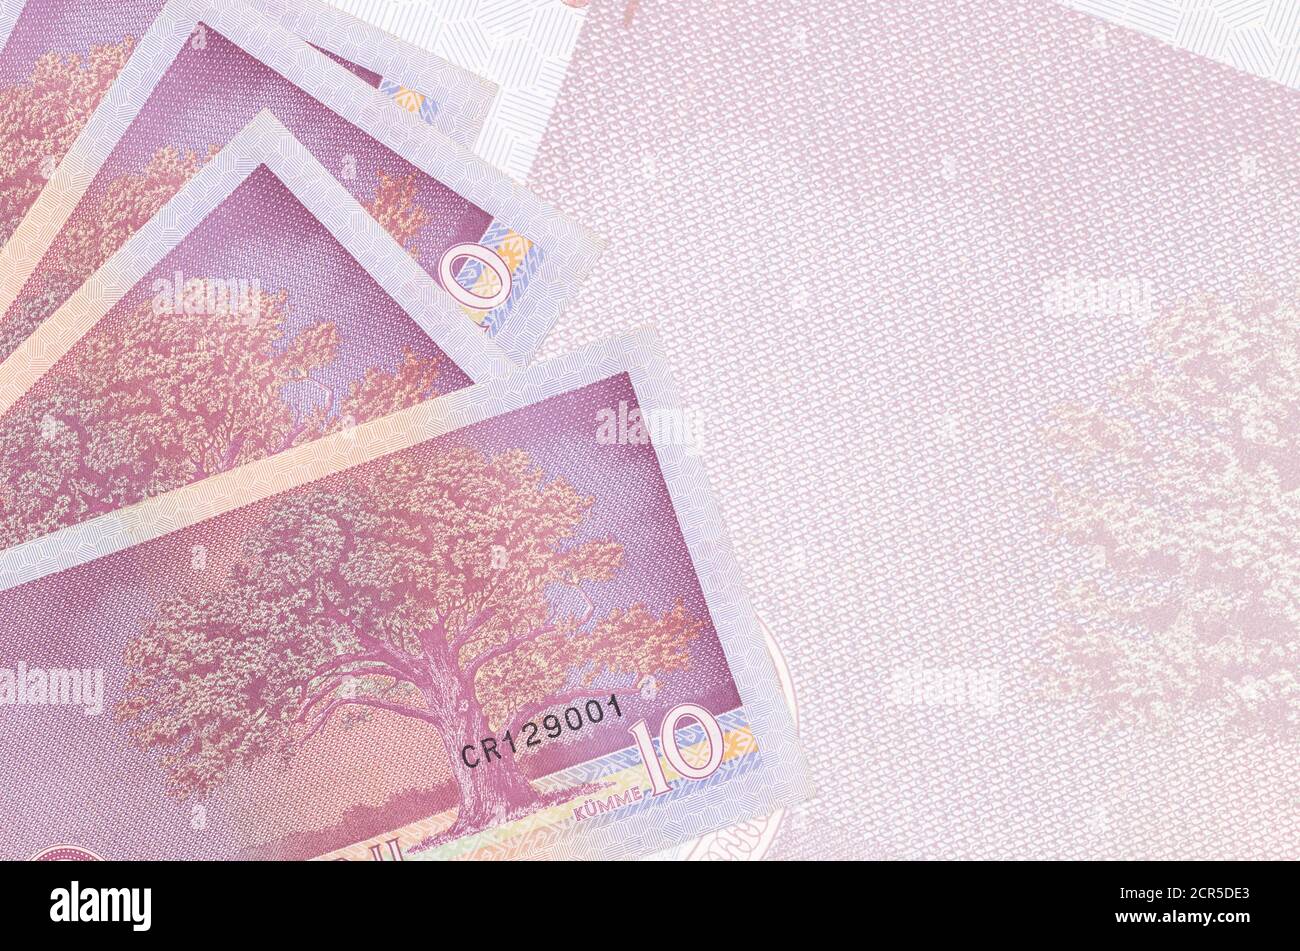 10 Estonian kroon bills lies in stack on background of big semi-transparent banknote. Abstract business background with copy space Stock Photo